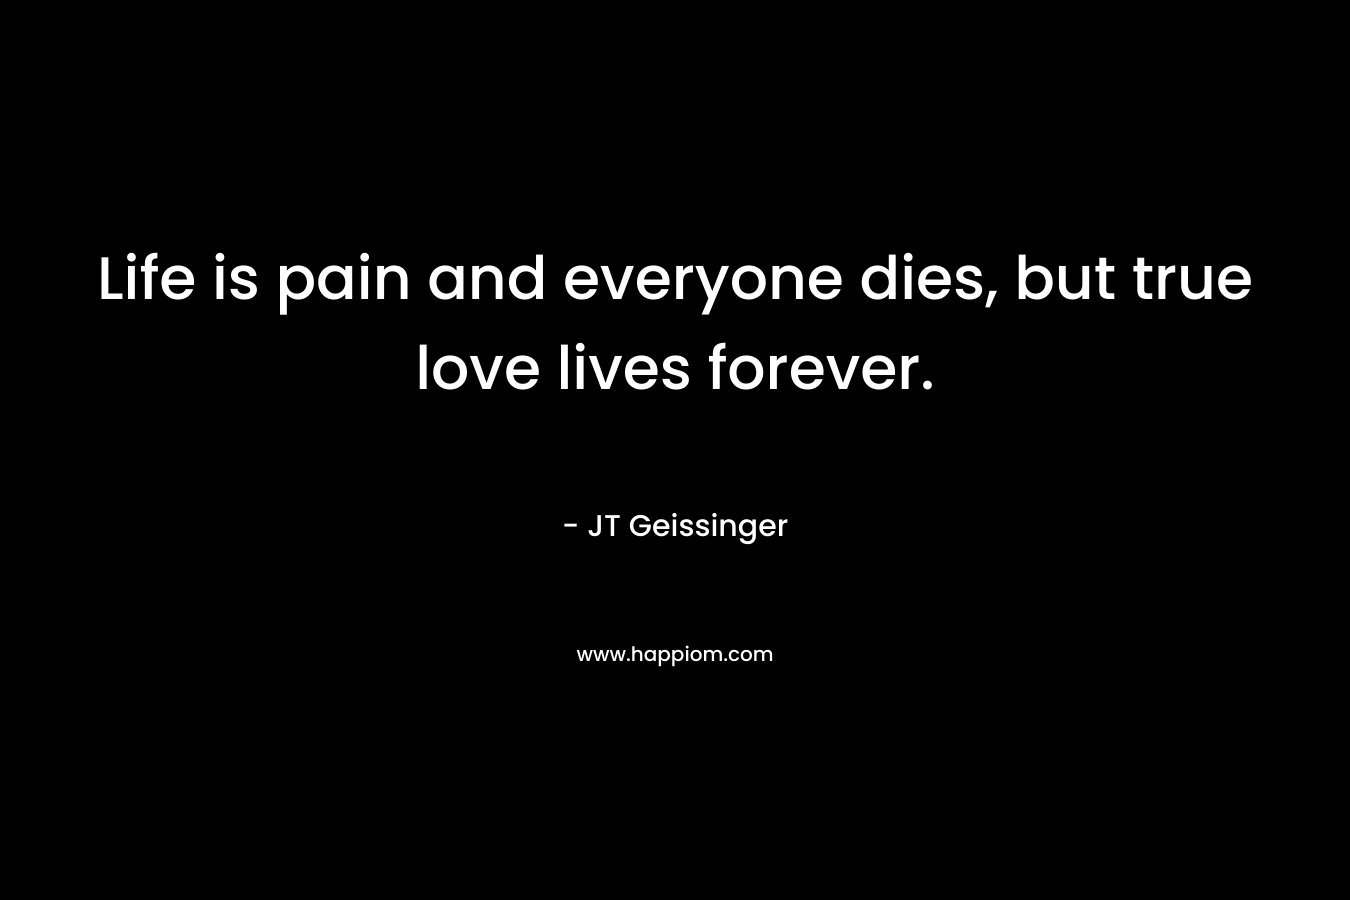 Life is pain and everyone dies, but true love lives forever.